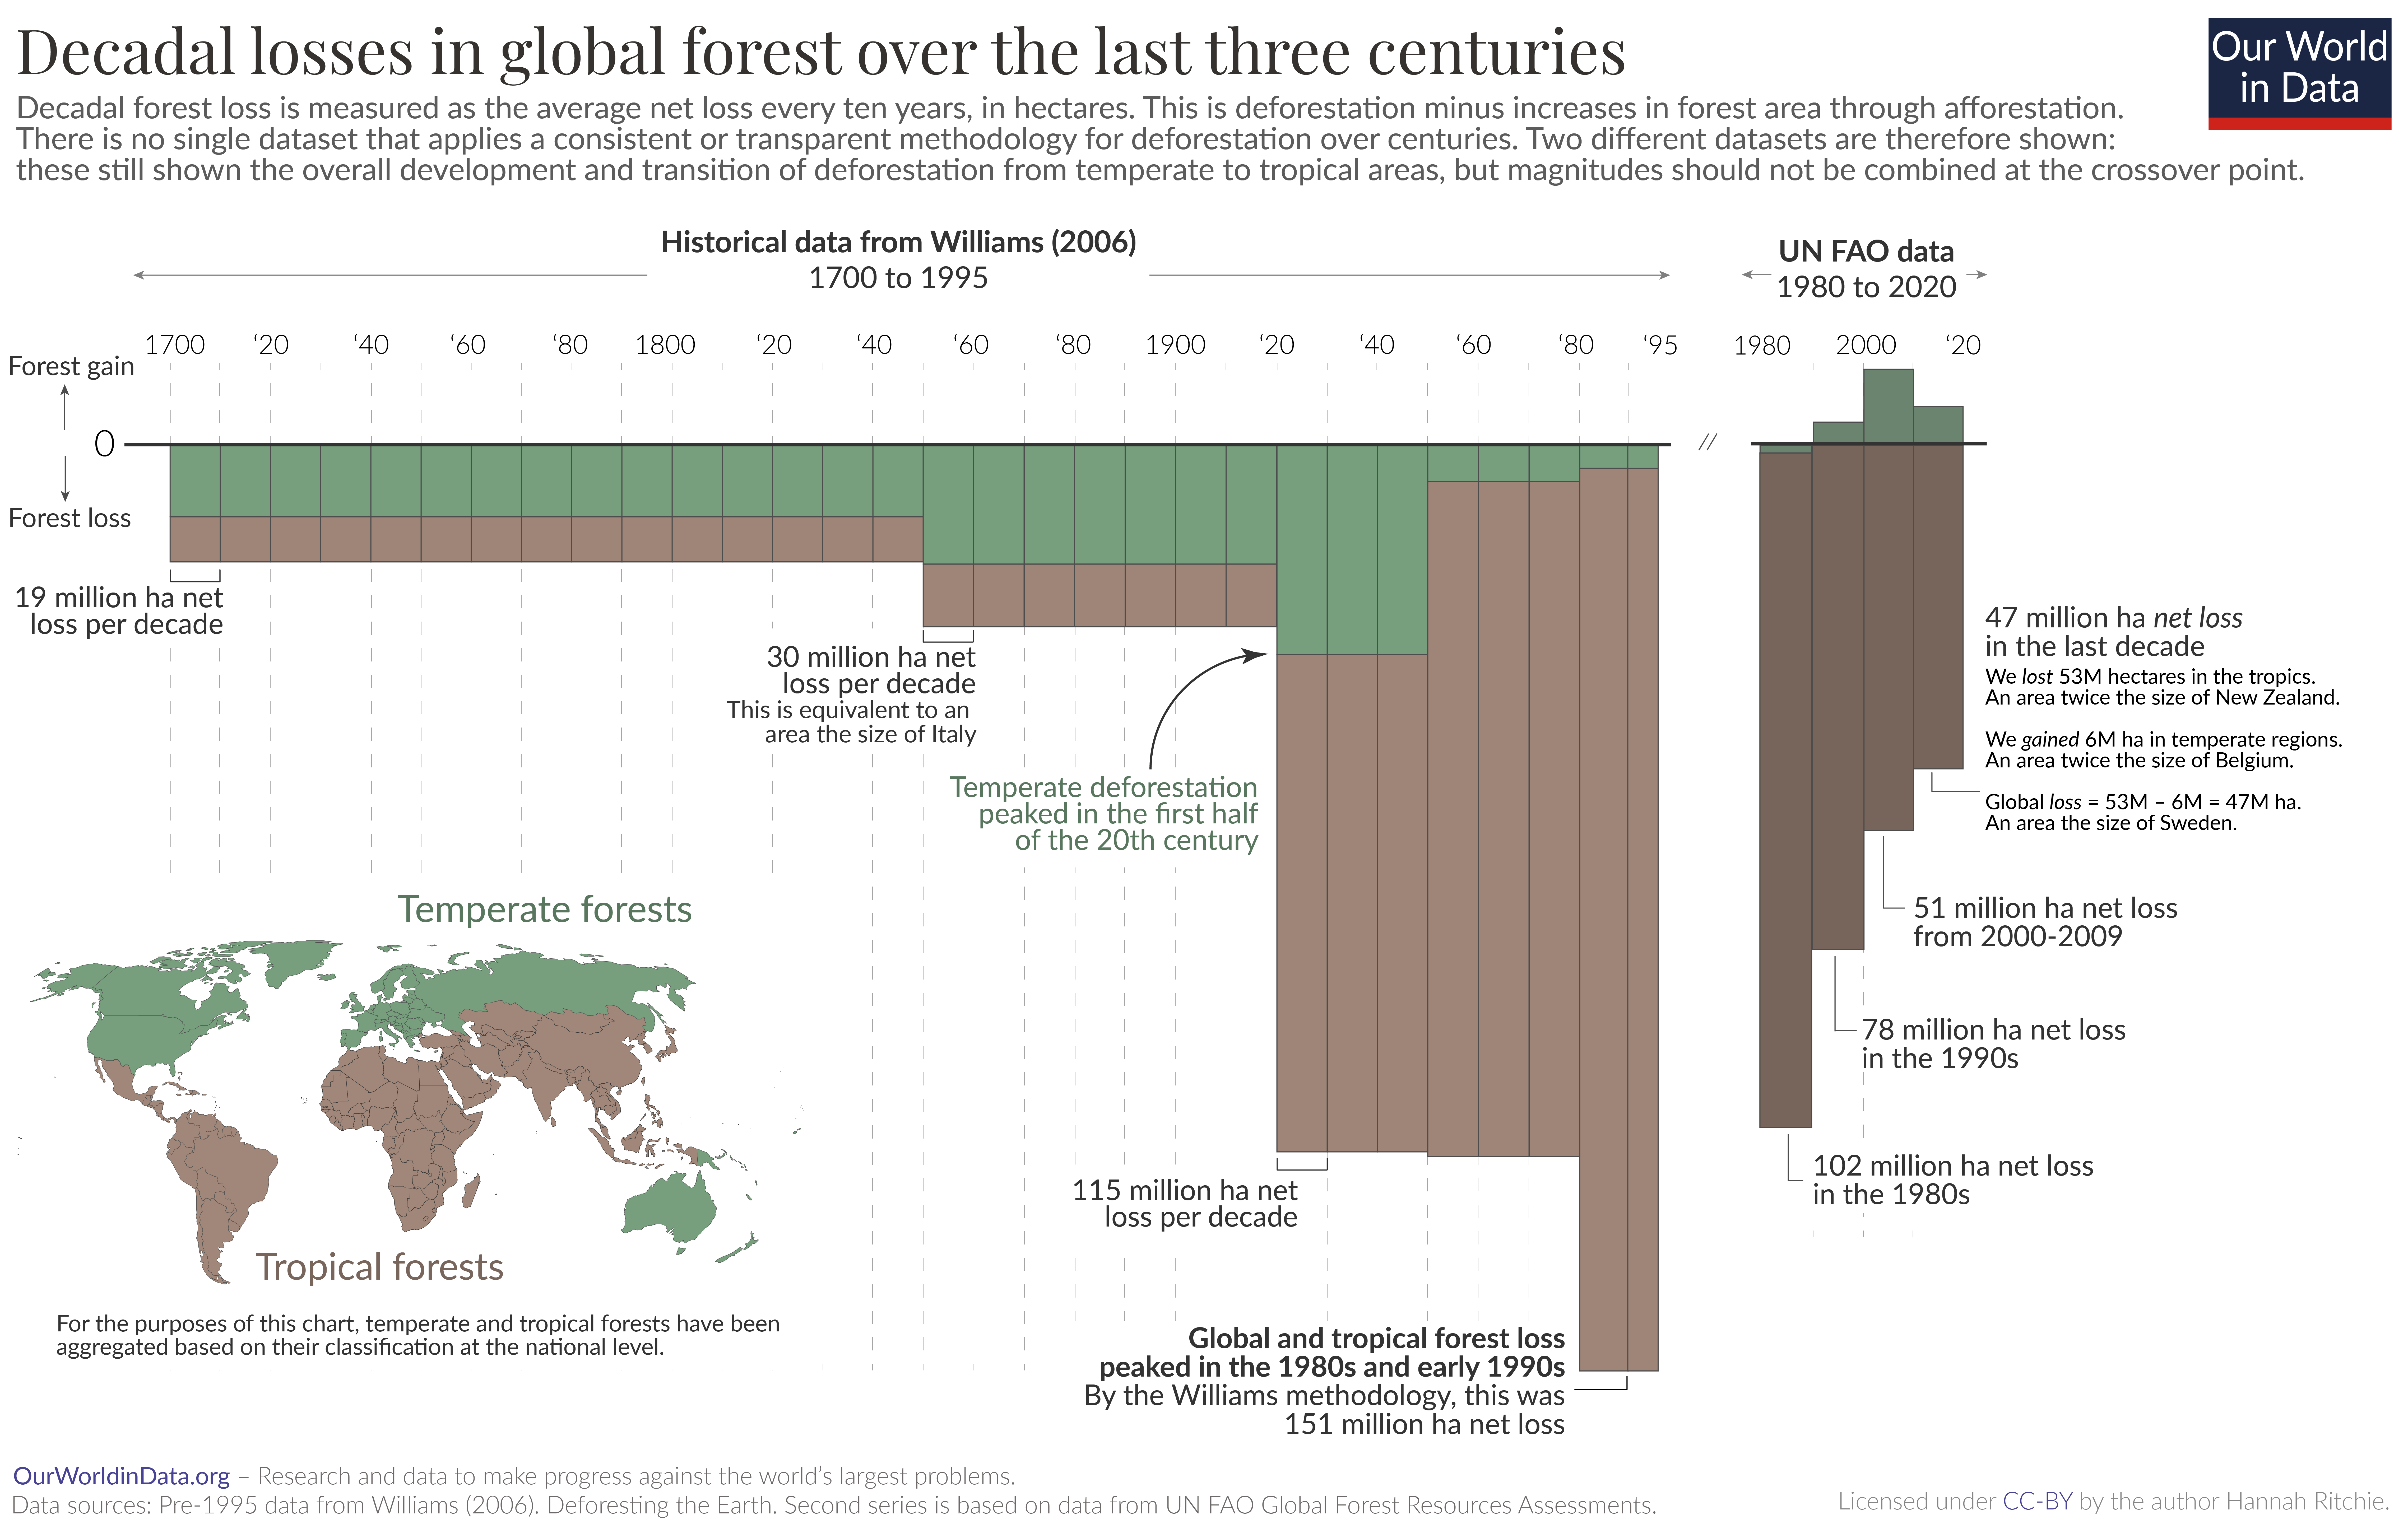 Marimekko chart showing global deforestation since 1700. Rates increased until the 1980s, and have fallen since then.